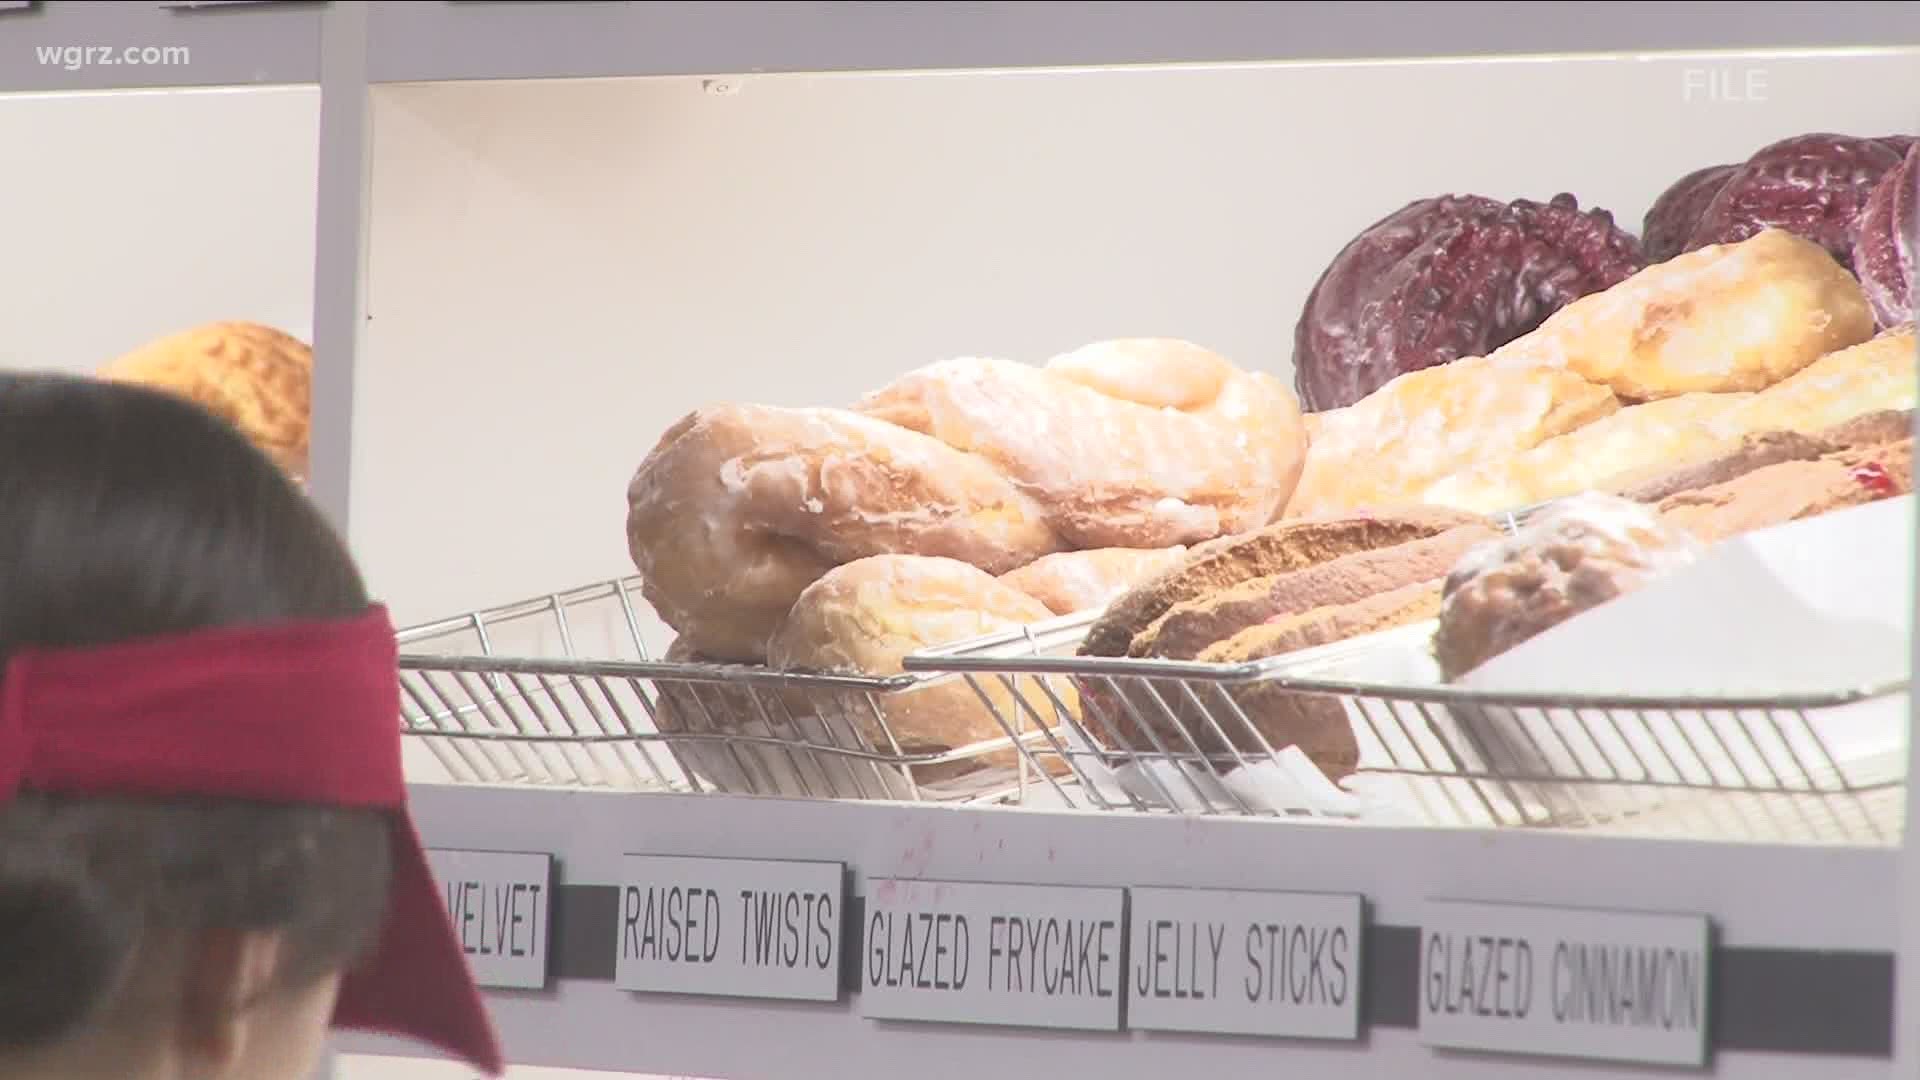 An employee at the Paula's donuts in Clarence has been fired after an incident with a customer earlier this week.